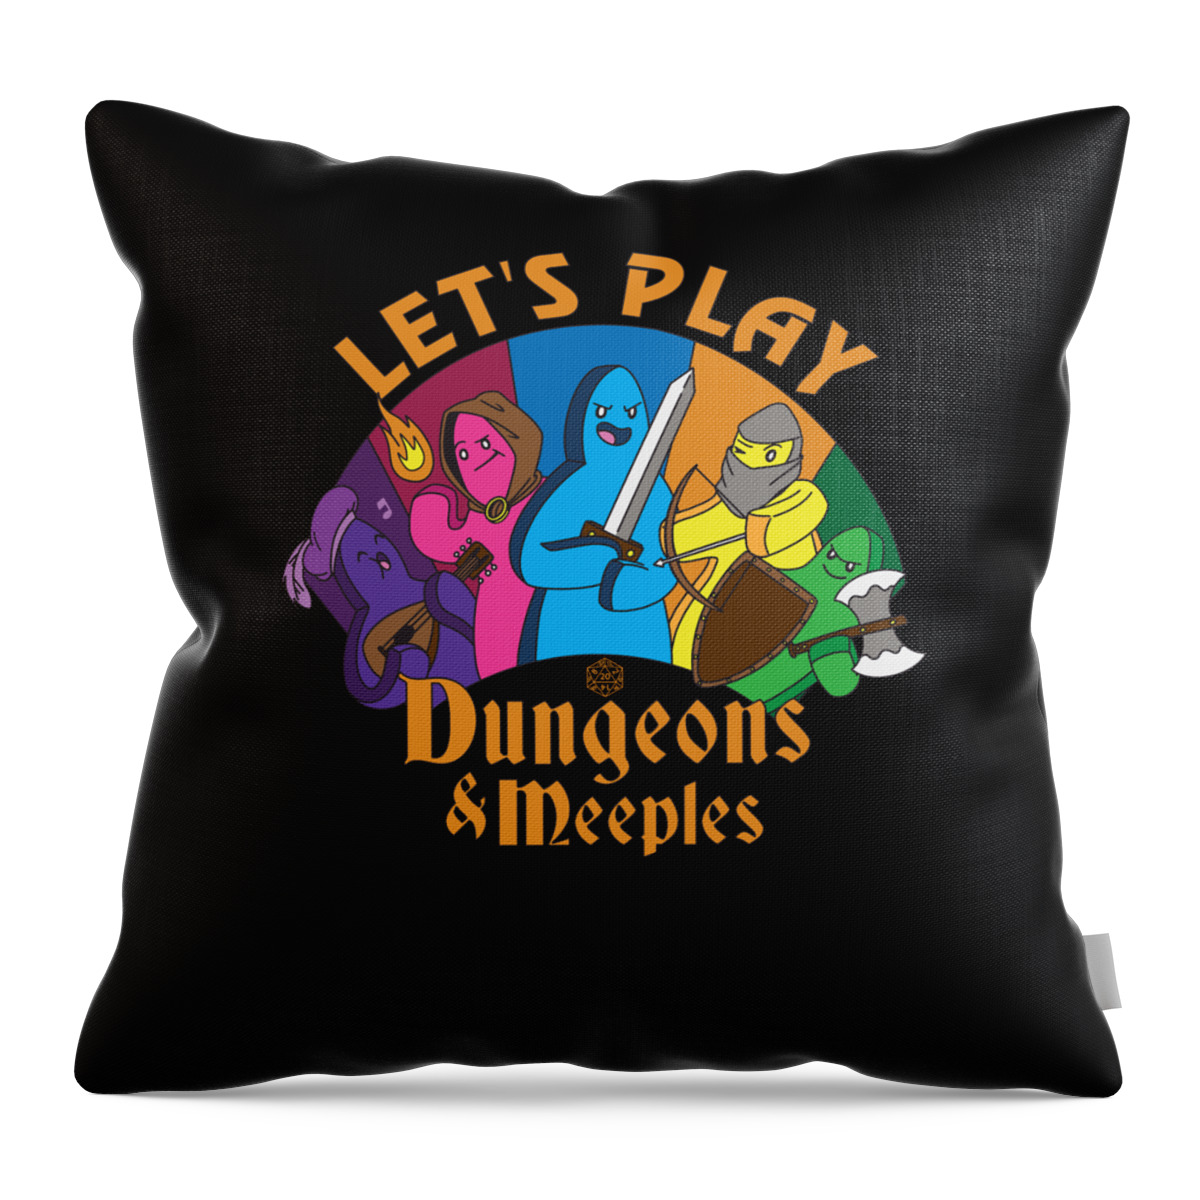 Dungeons And Meeples Throw Pillow featuring the digital art Lets Play Dungeons and Meeples by Me